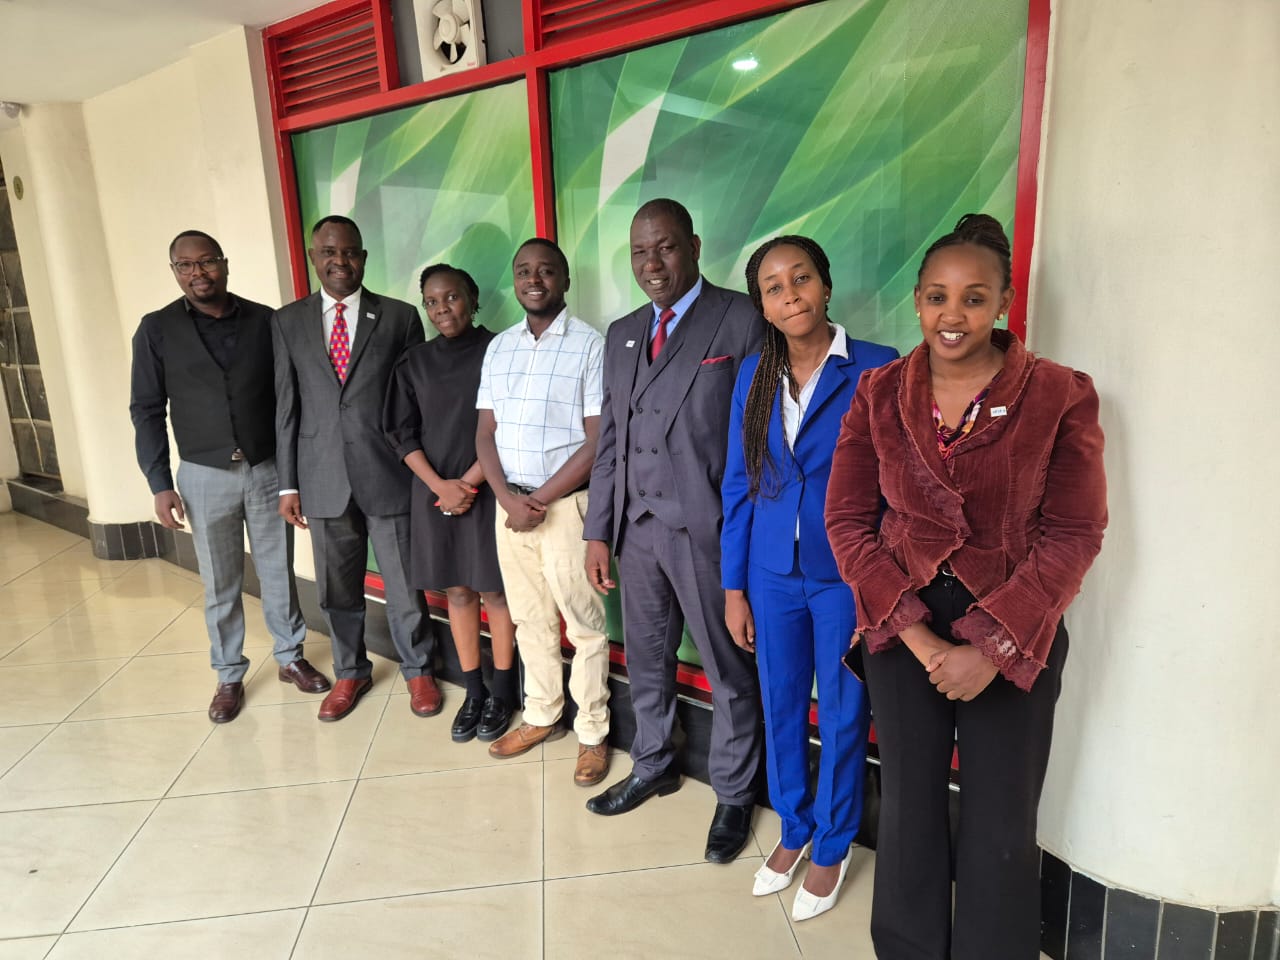 Courtesy call to Environment Institute of Kenya